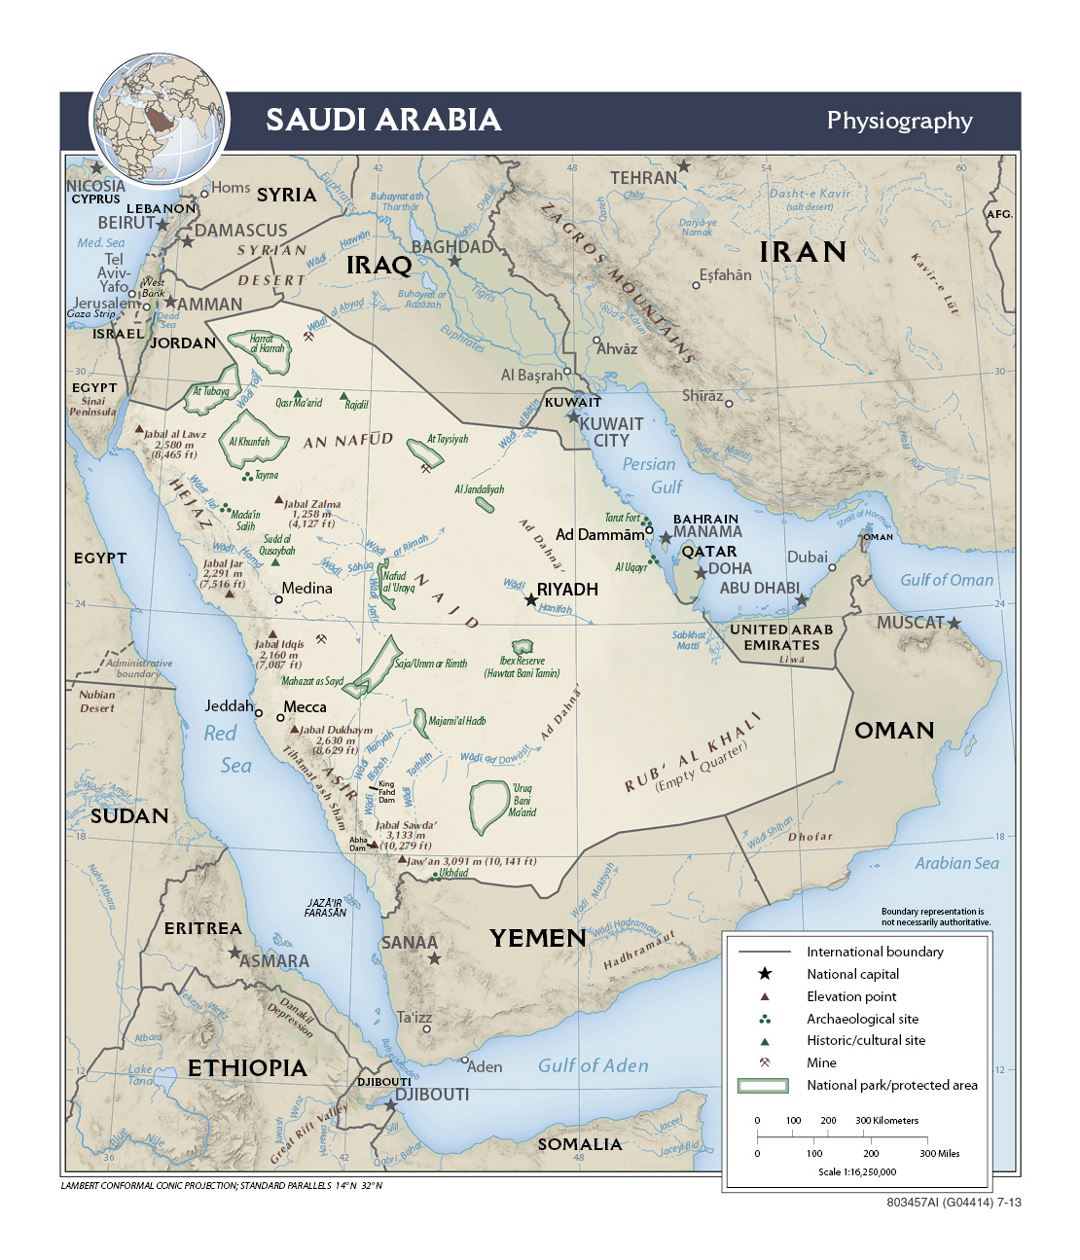 Detailed physiography map of Saudi Arabia - 2013